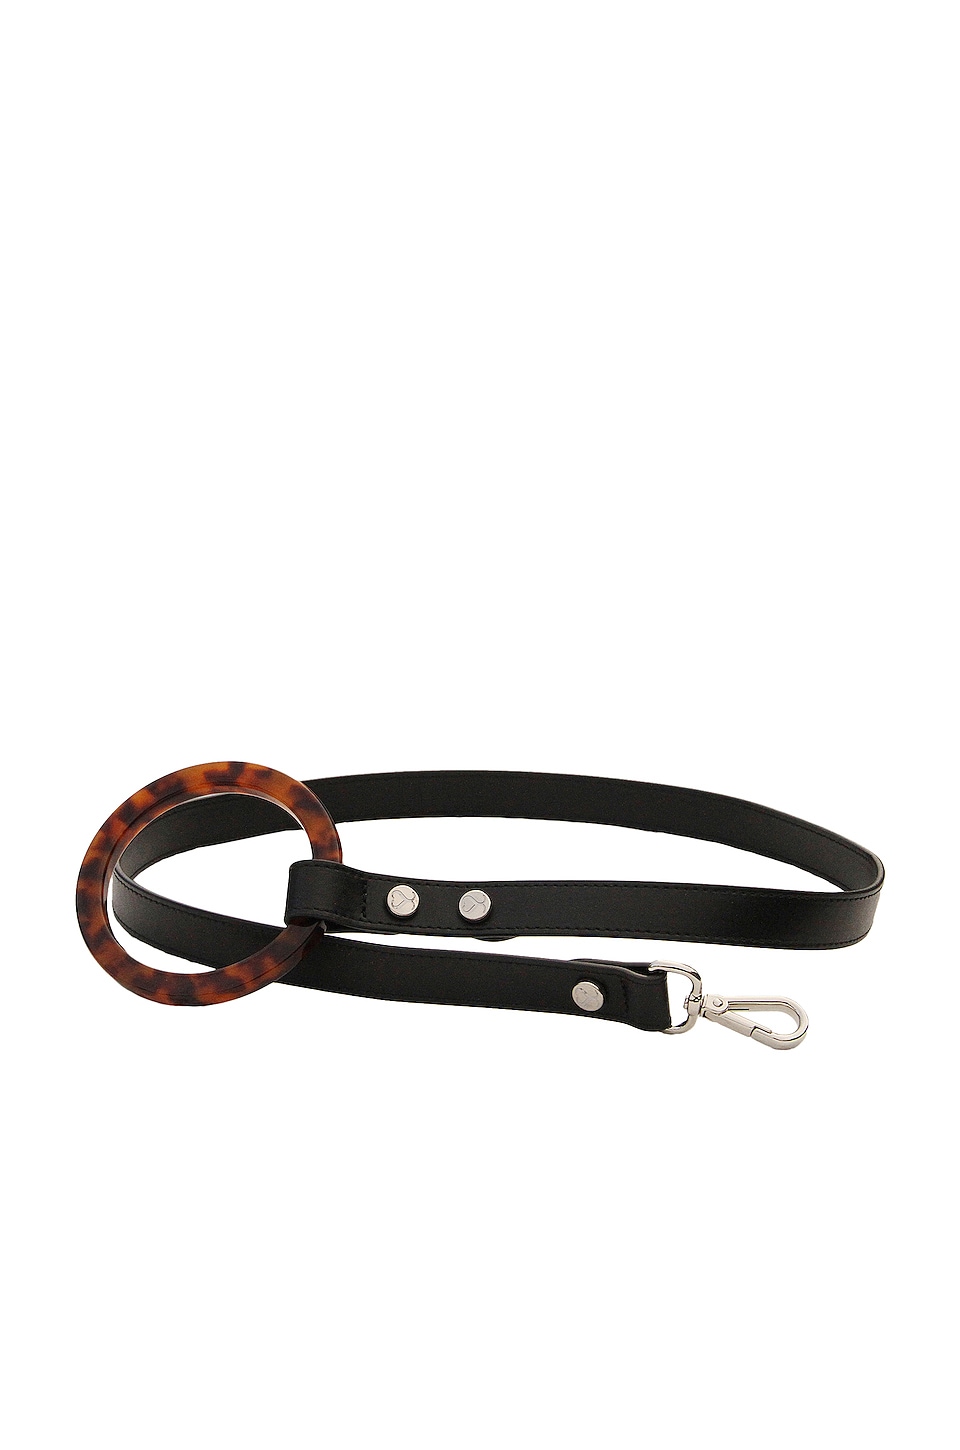 Shaya Pets The Taylor Large Collar in Embossed Yellow & Black